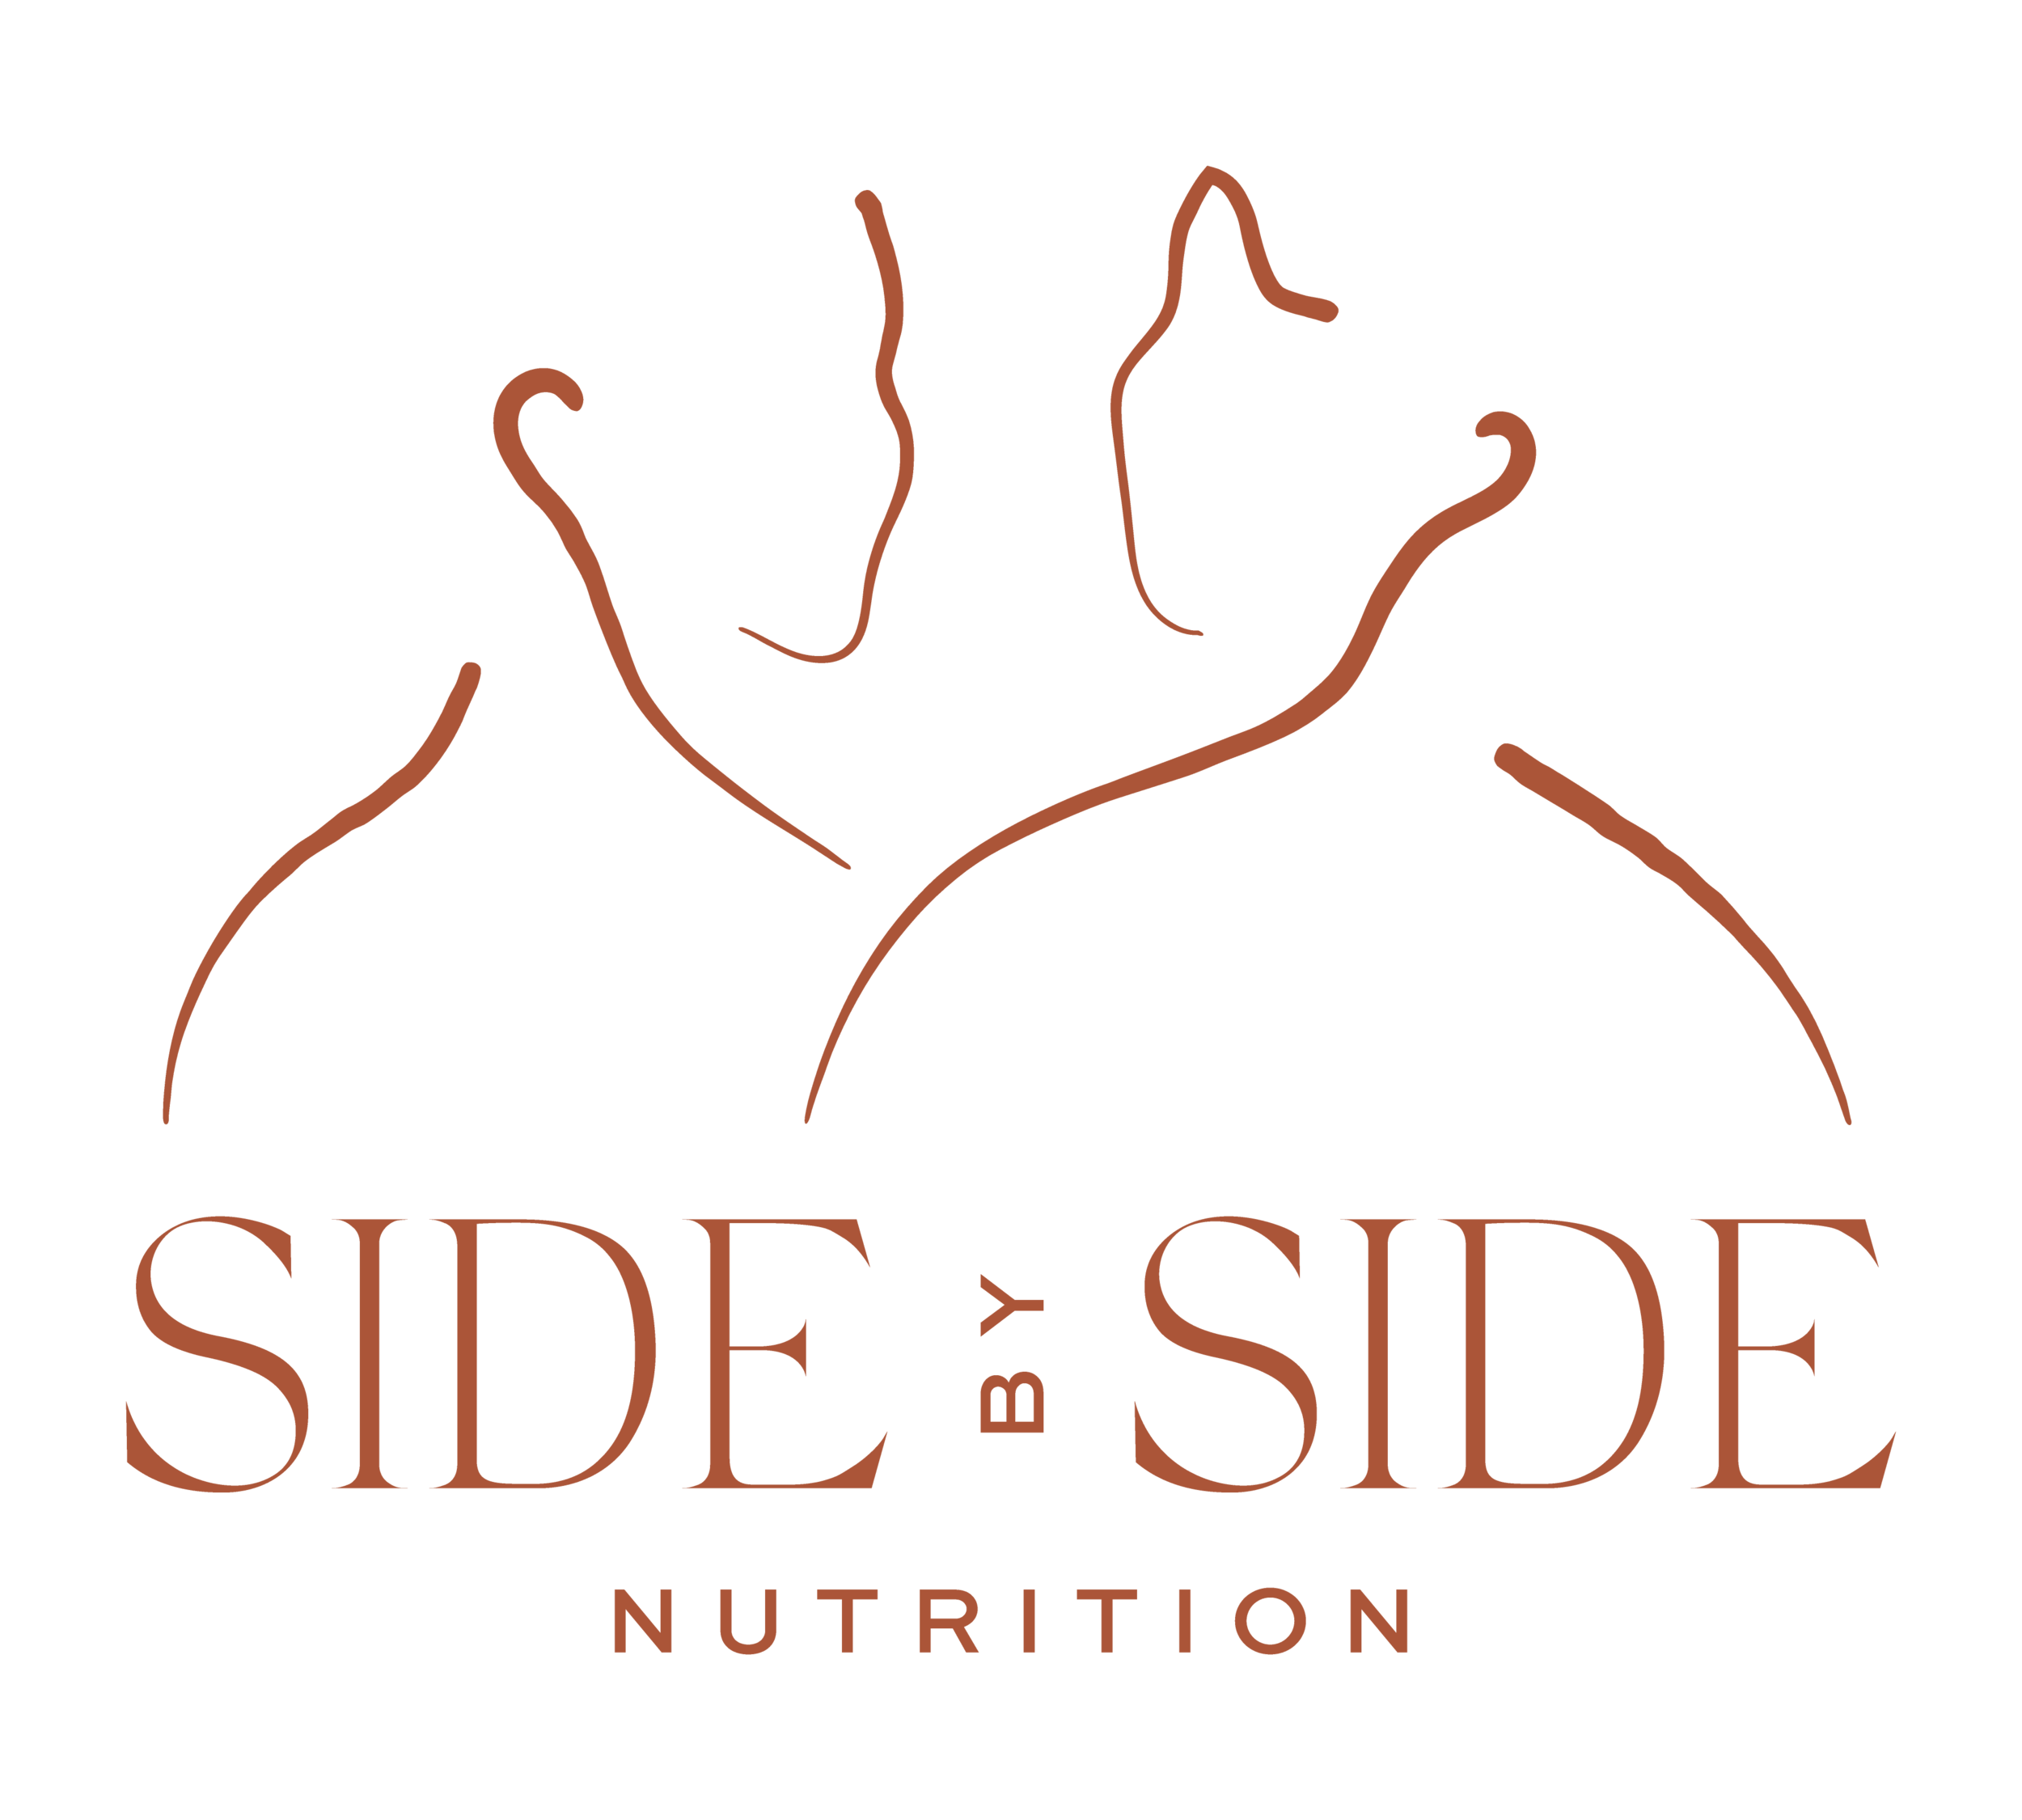 Eating Disorders Treatment Dietitian Nutritionist in Colorado Springs &amp; Fort Collins, CO